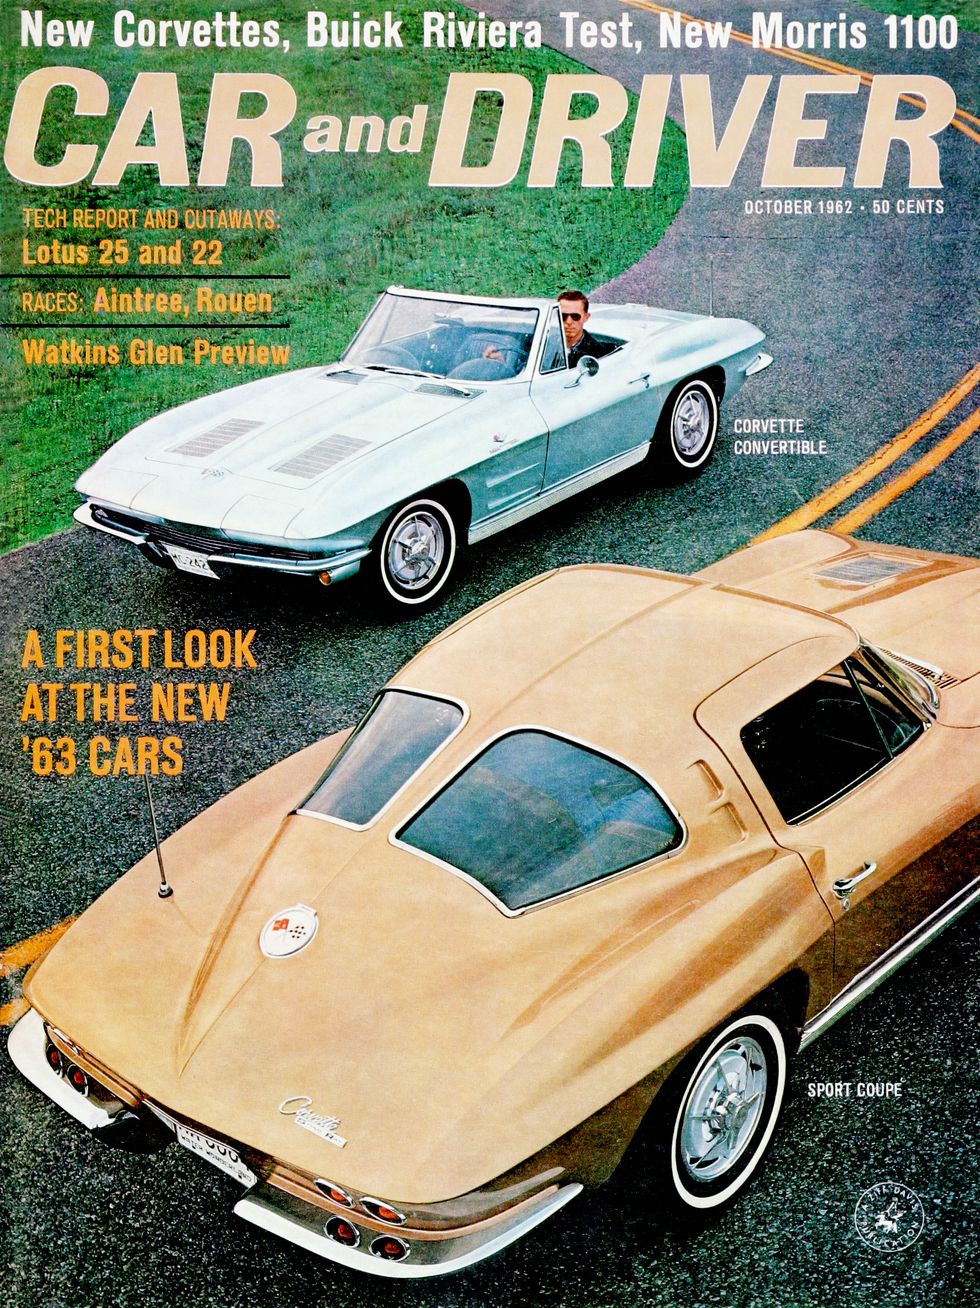 October 1962 issue of Car & Driver Magazine